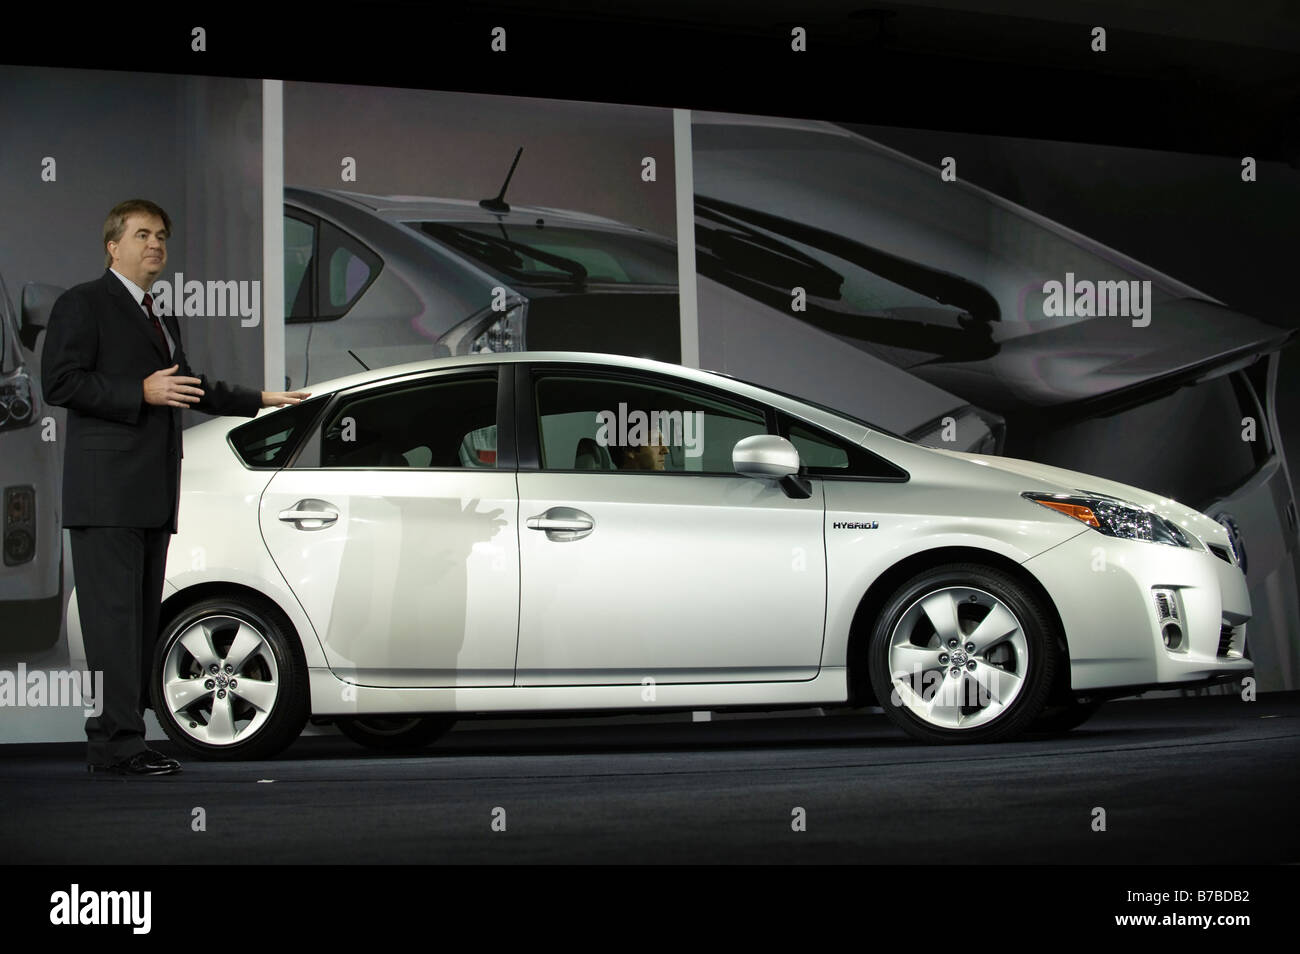 The 2010 Toyota Prius debut at the 2009 North American International Auto Show in Detroit Michigan USA Stock Photo